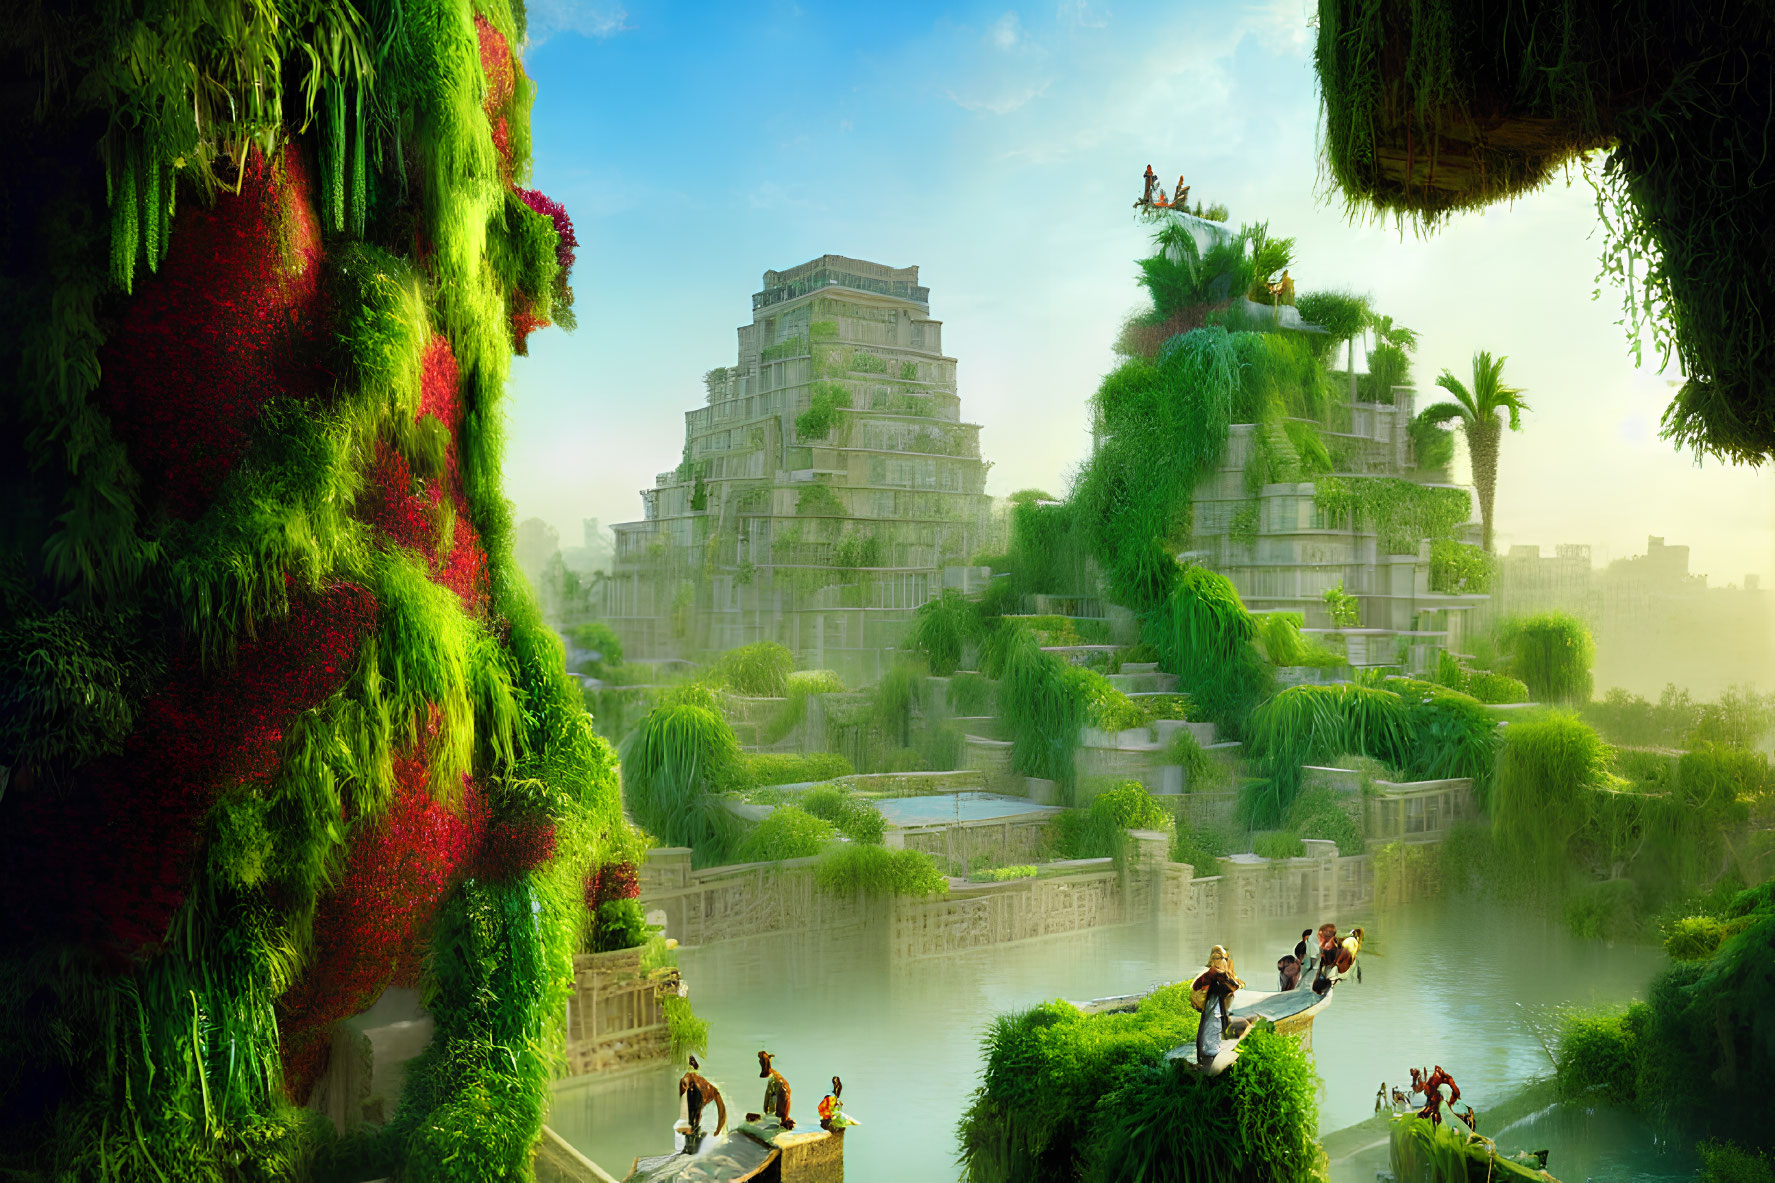 Ancient stepped pyramids in lush greenery with people in serene water-filled setting